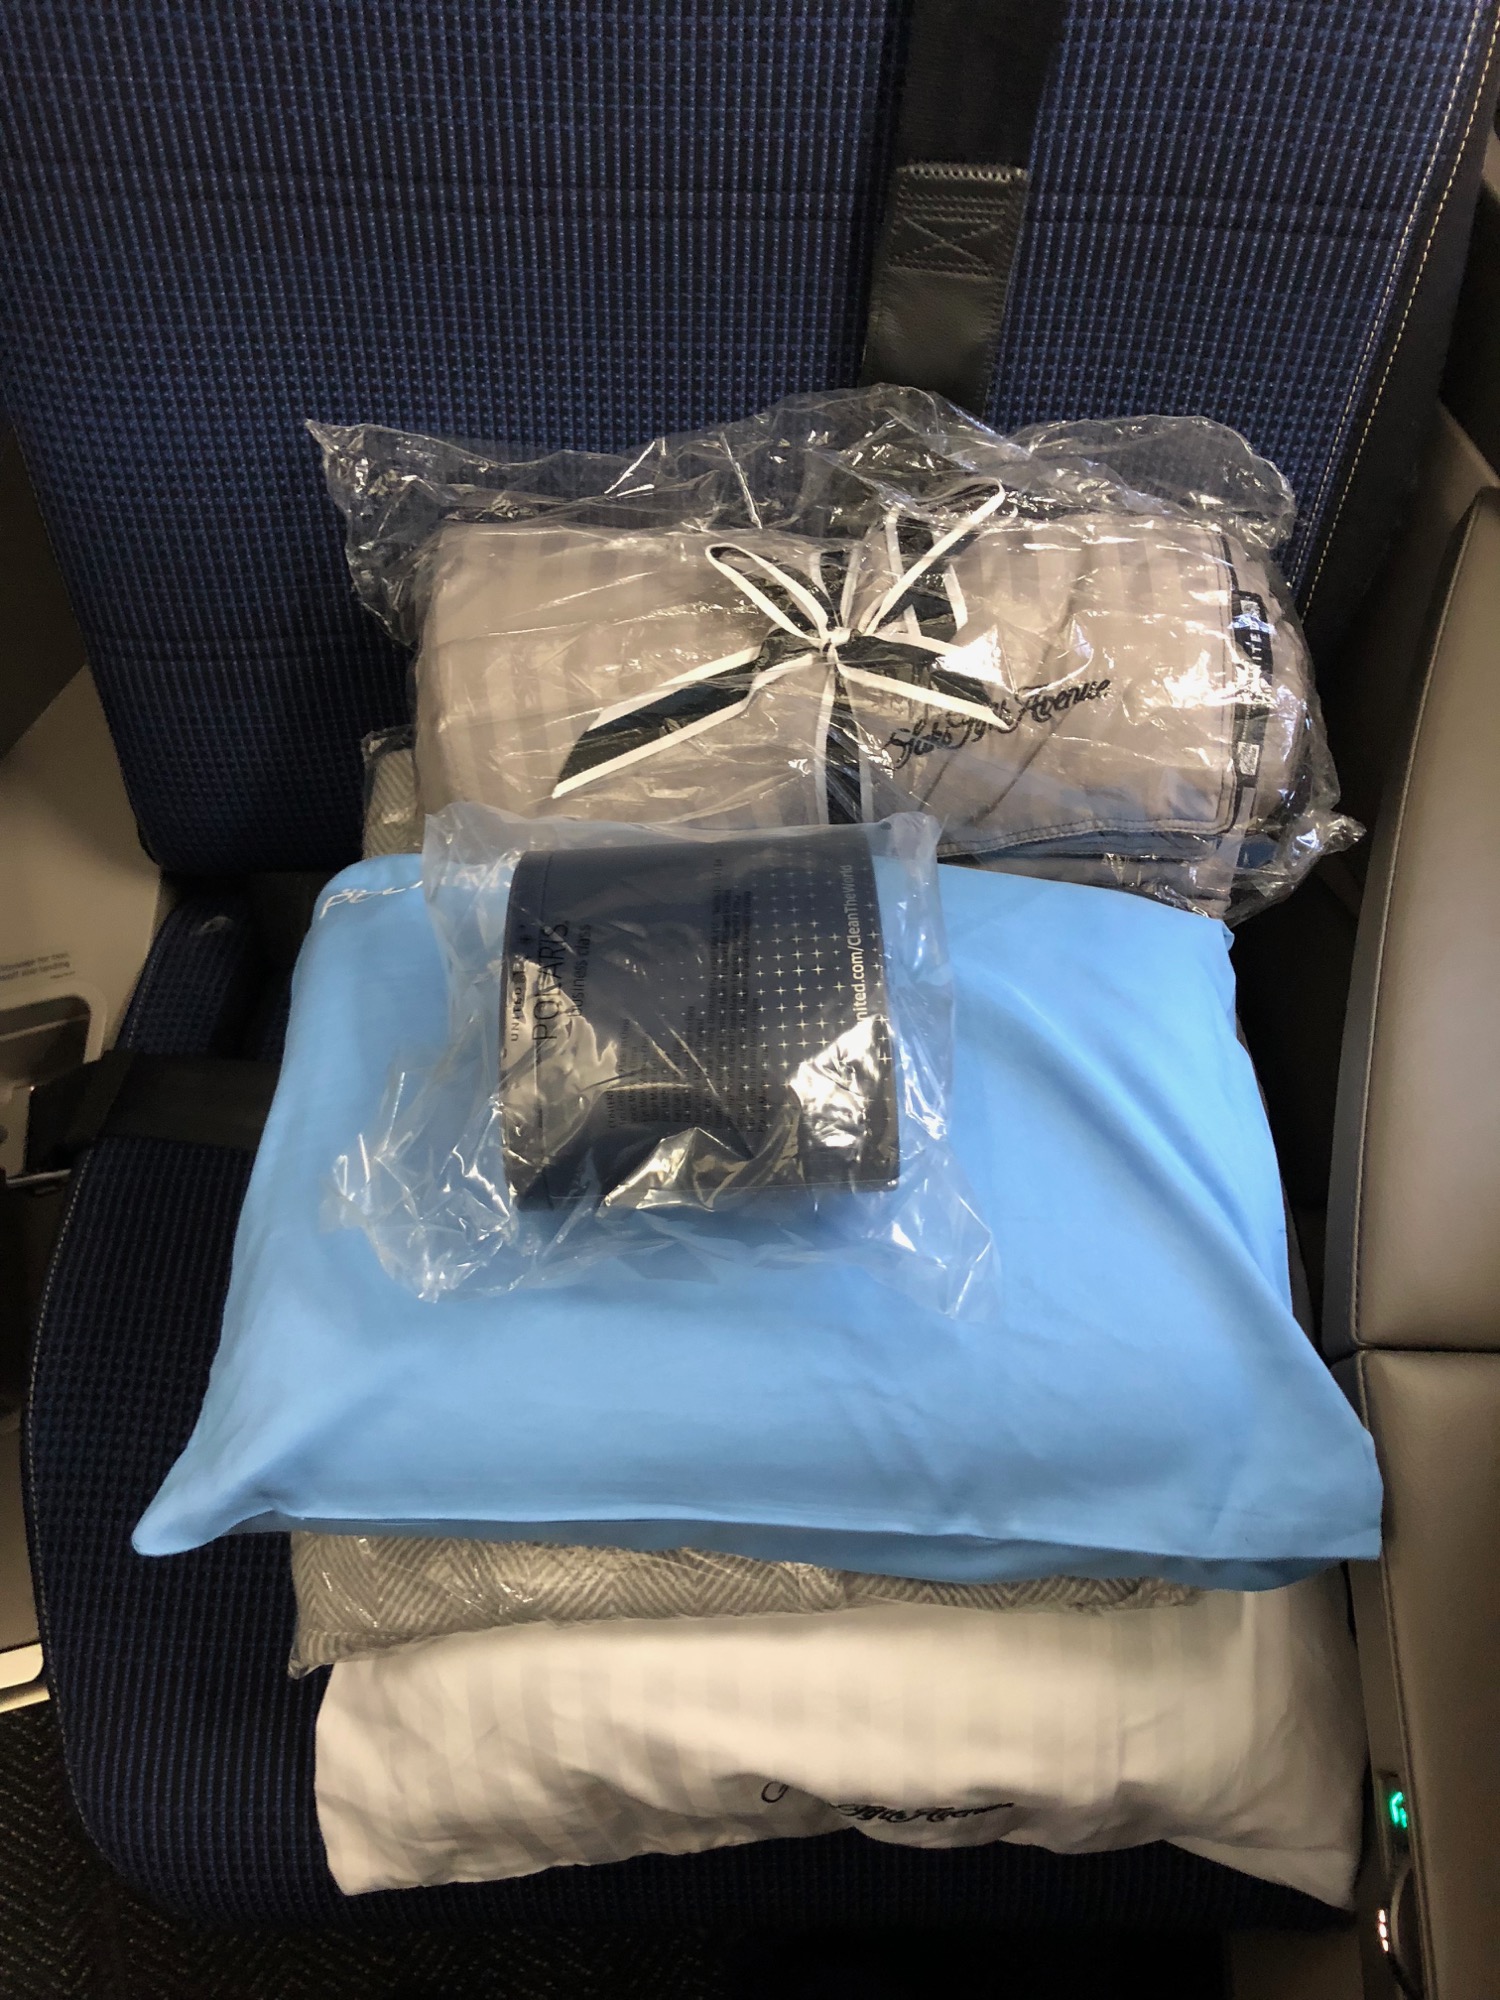 a group of pillows and blankets in a plastic bag